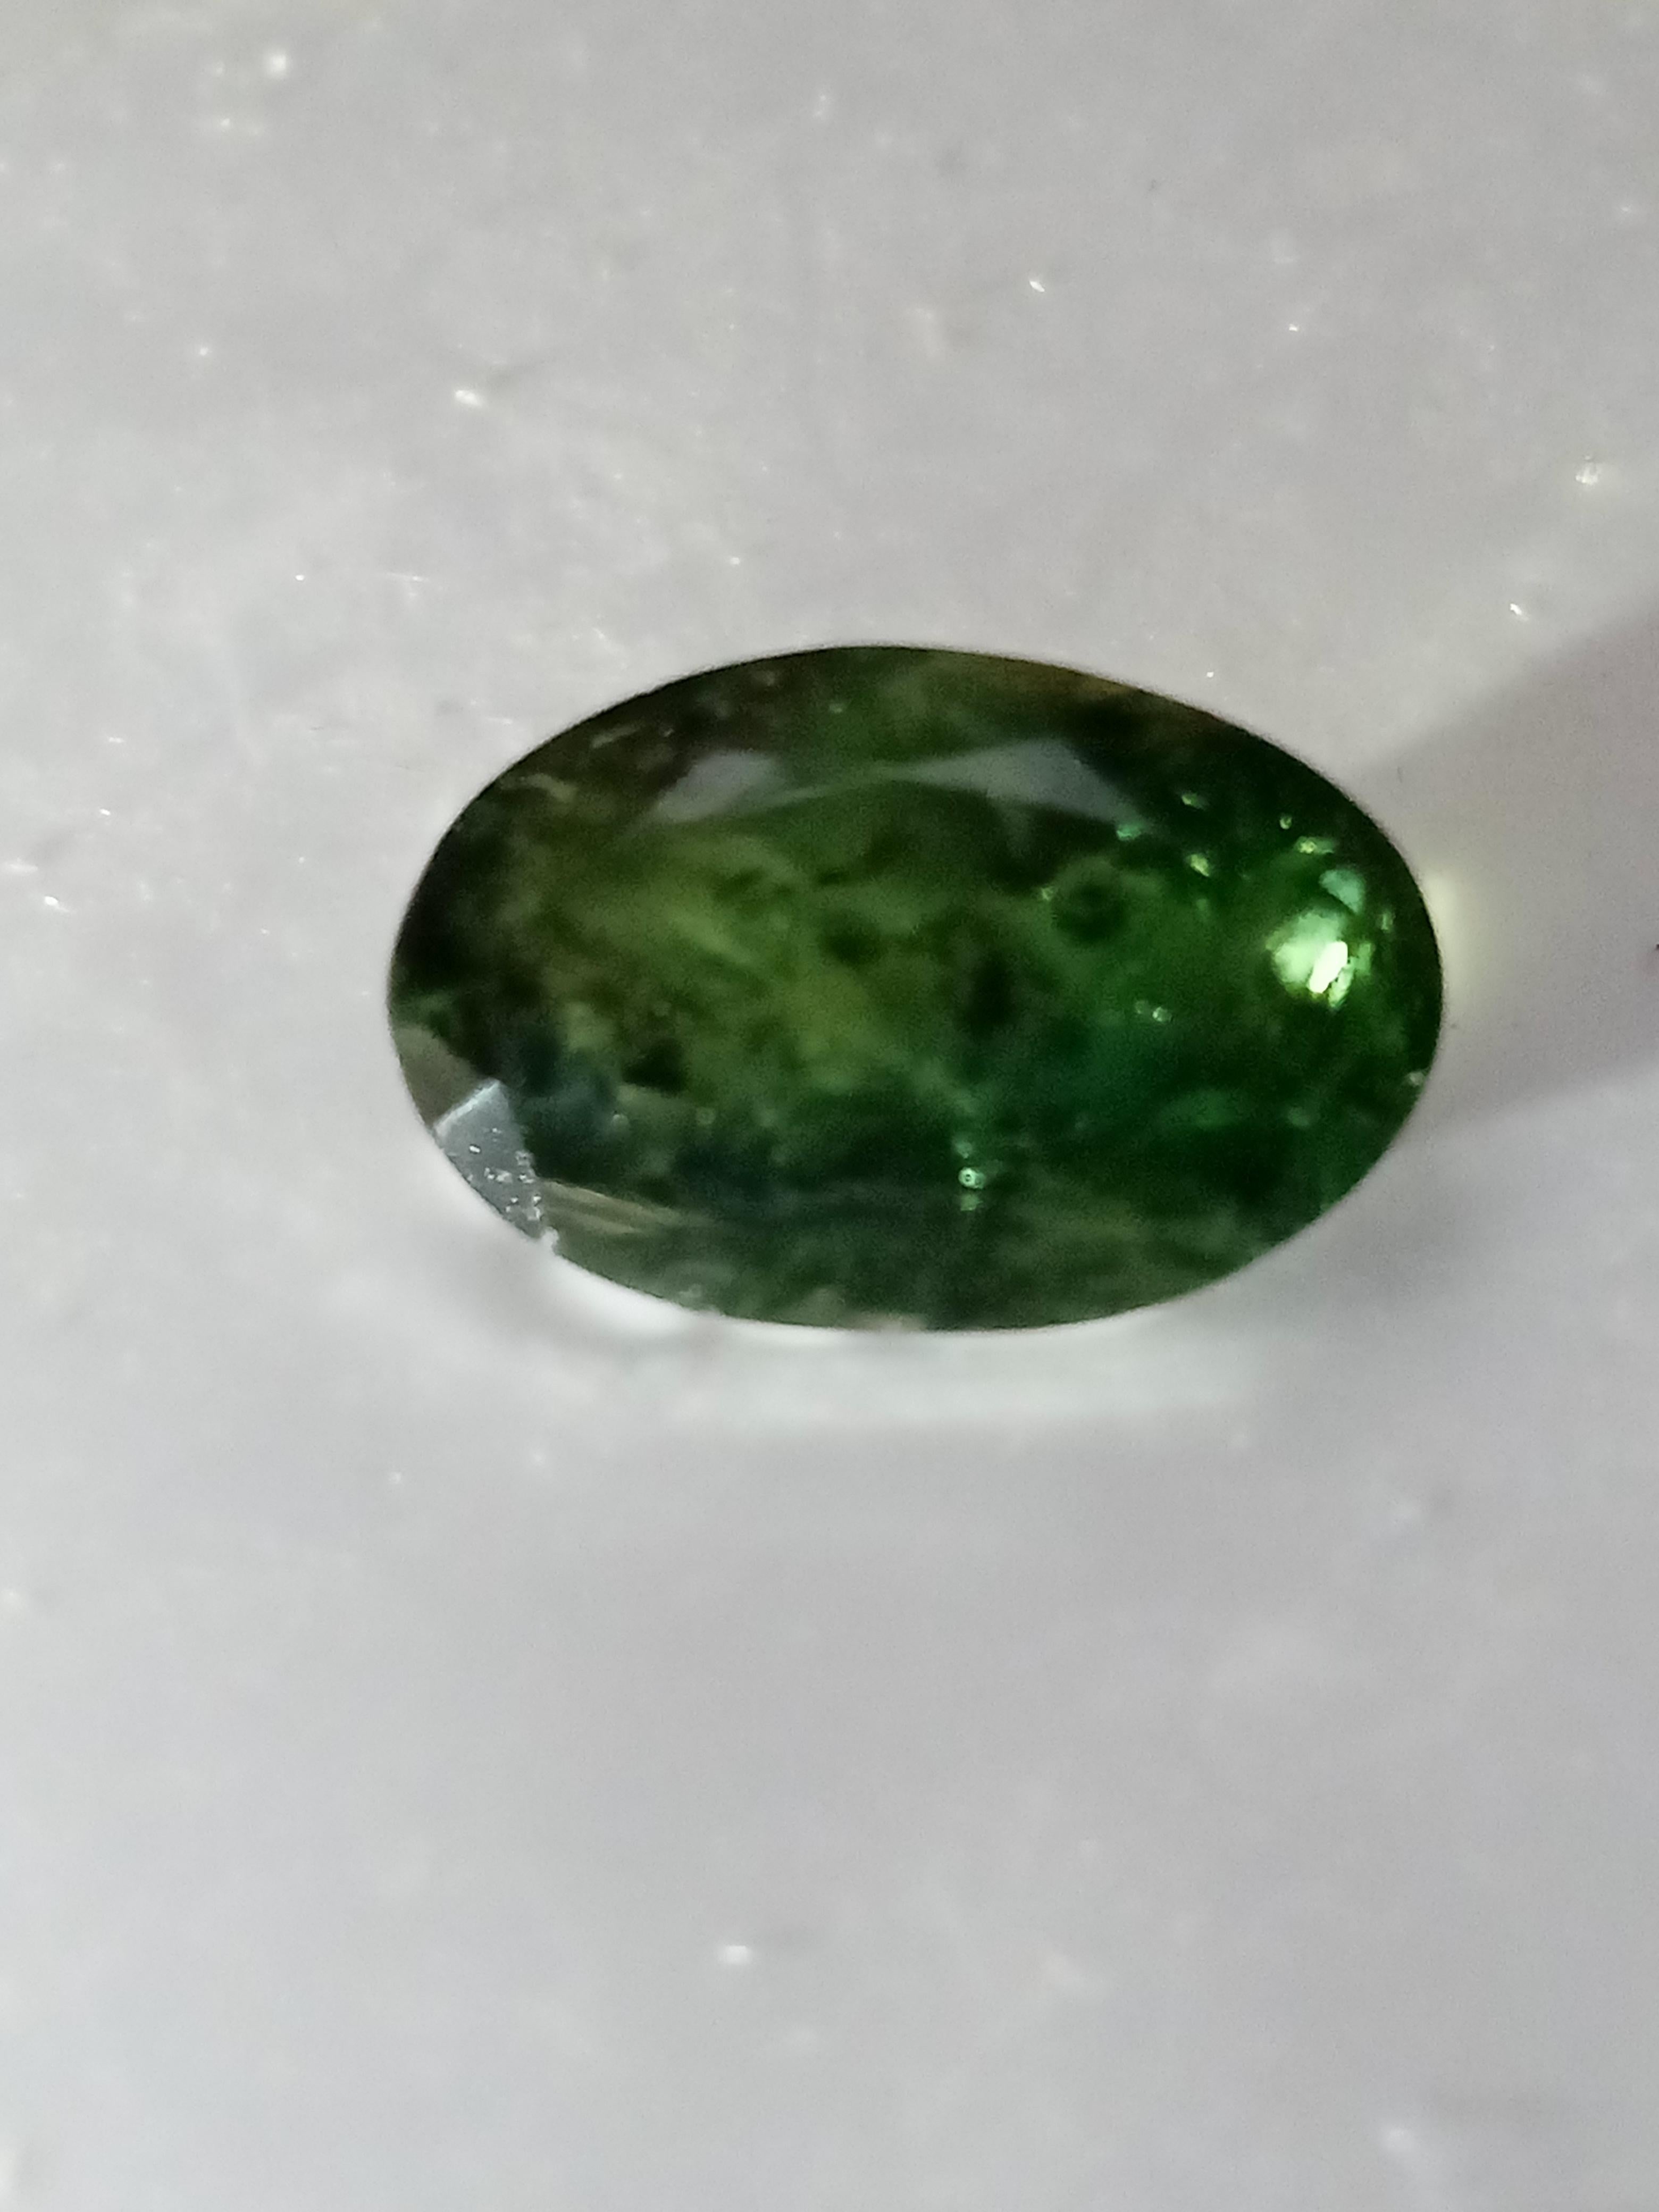 Natural green Australia sapphire not heated not treated with slight natural inclusions weight 5.35 carat
Add a touch of elegance to your jewellery collection with this stunning 5.3-carat oval-cut natural green sapphire from Australia. It has a very